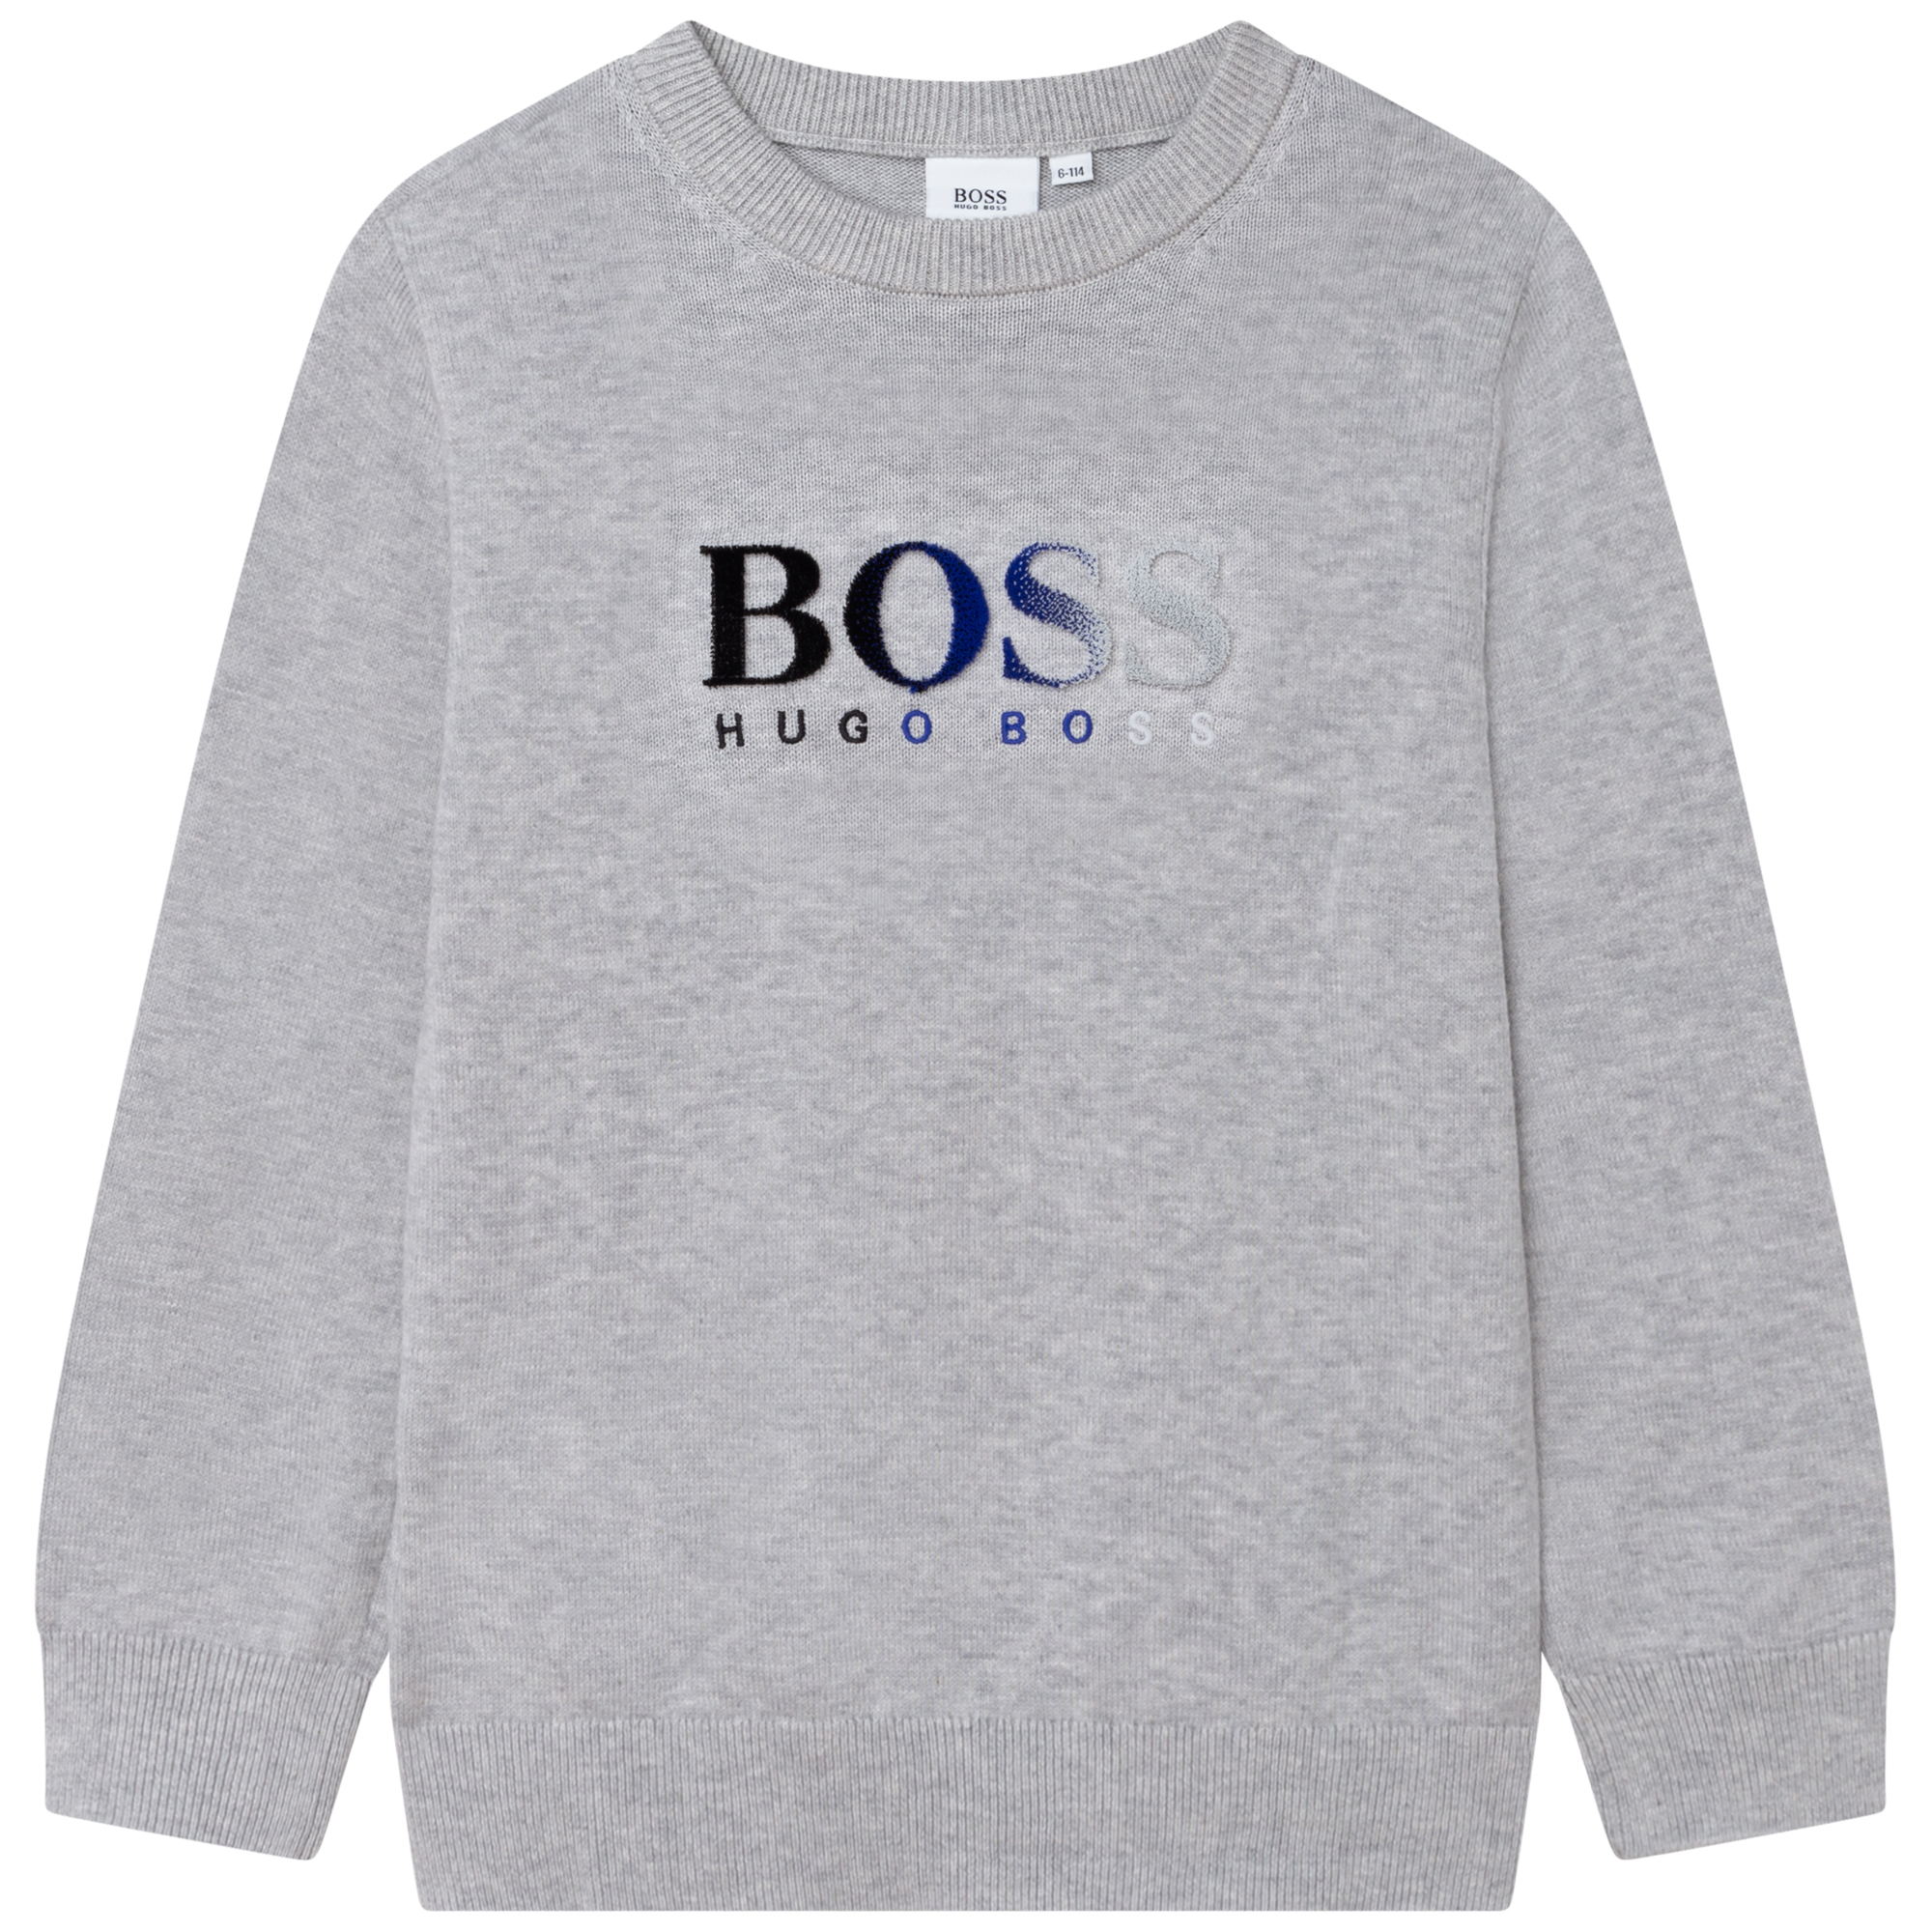 Tricot sweater with print BOSS for BOY